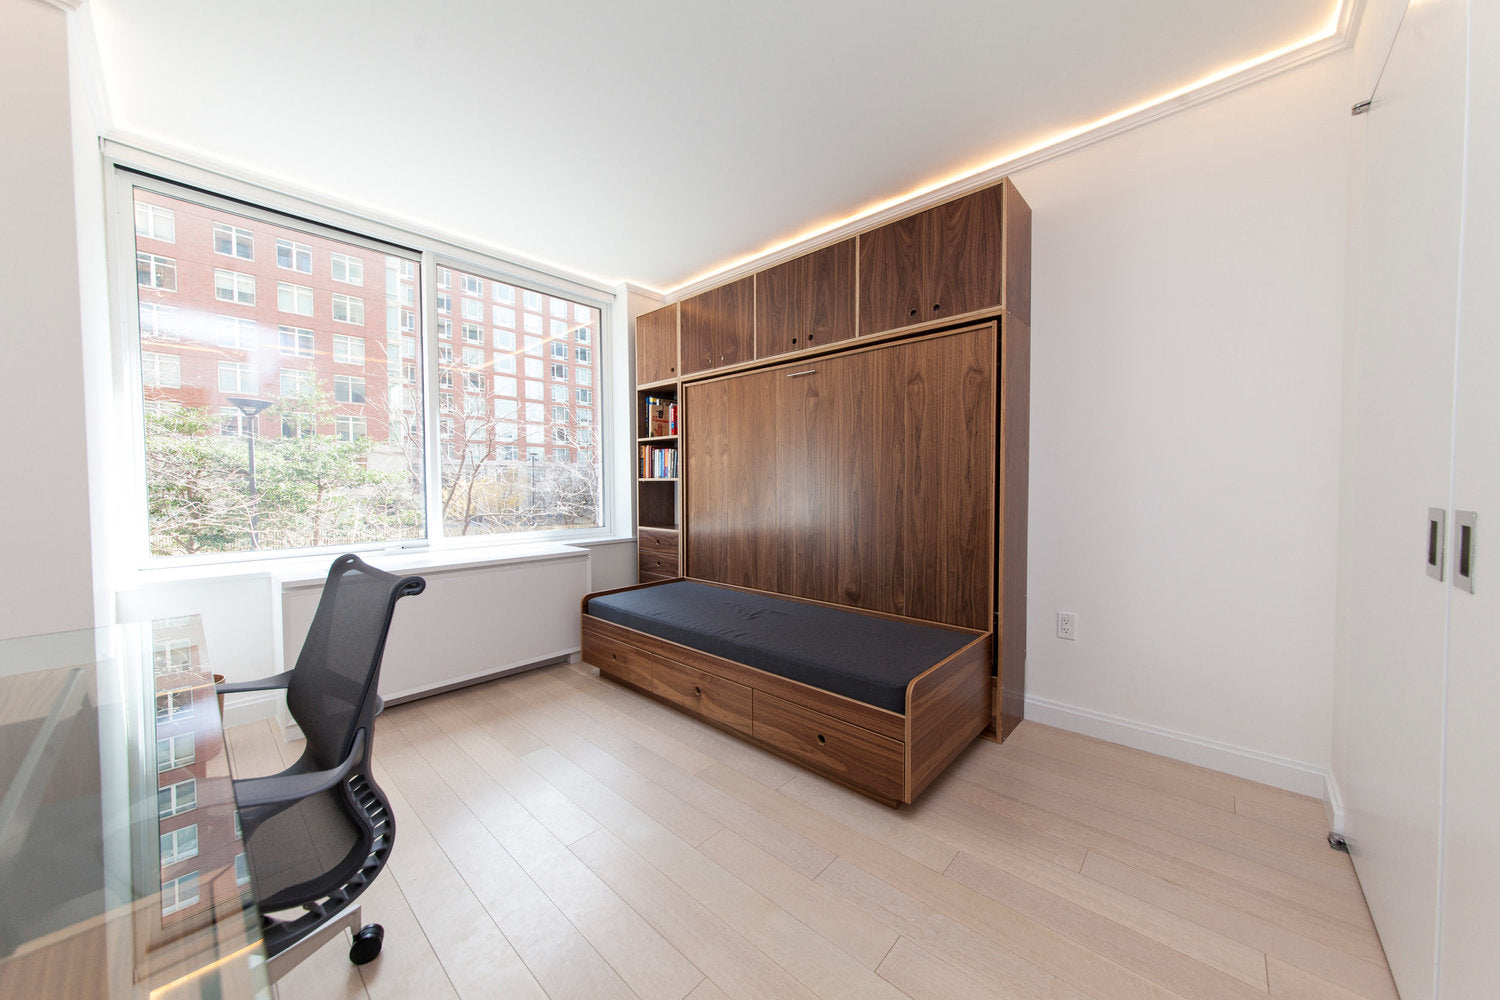 Modern room with a cabinet bed, large window, and an office chair.